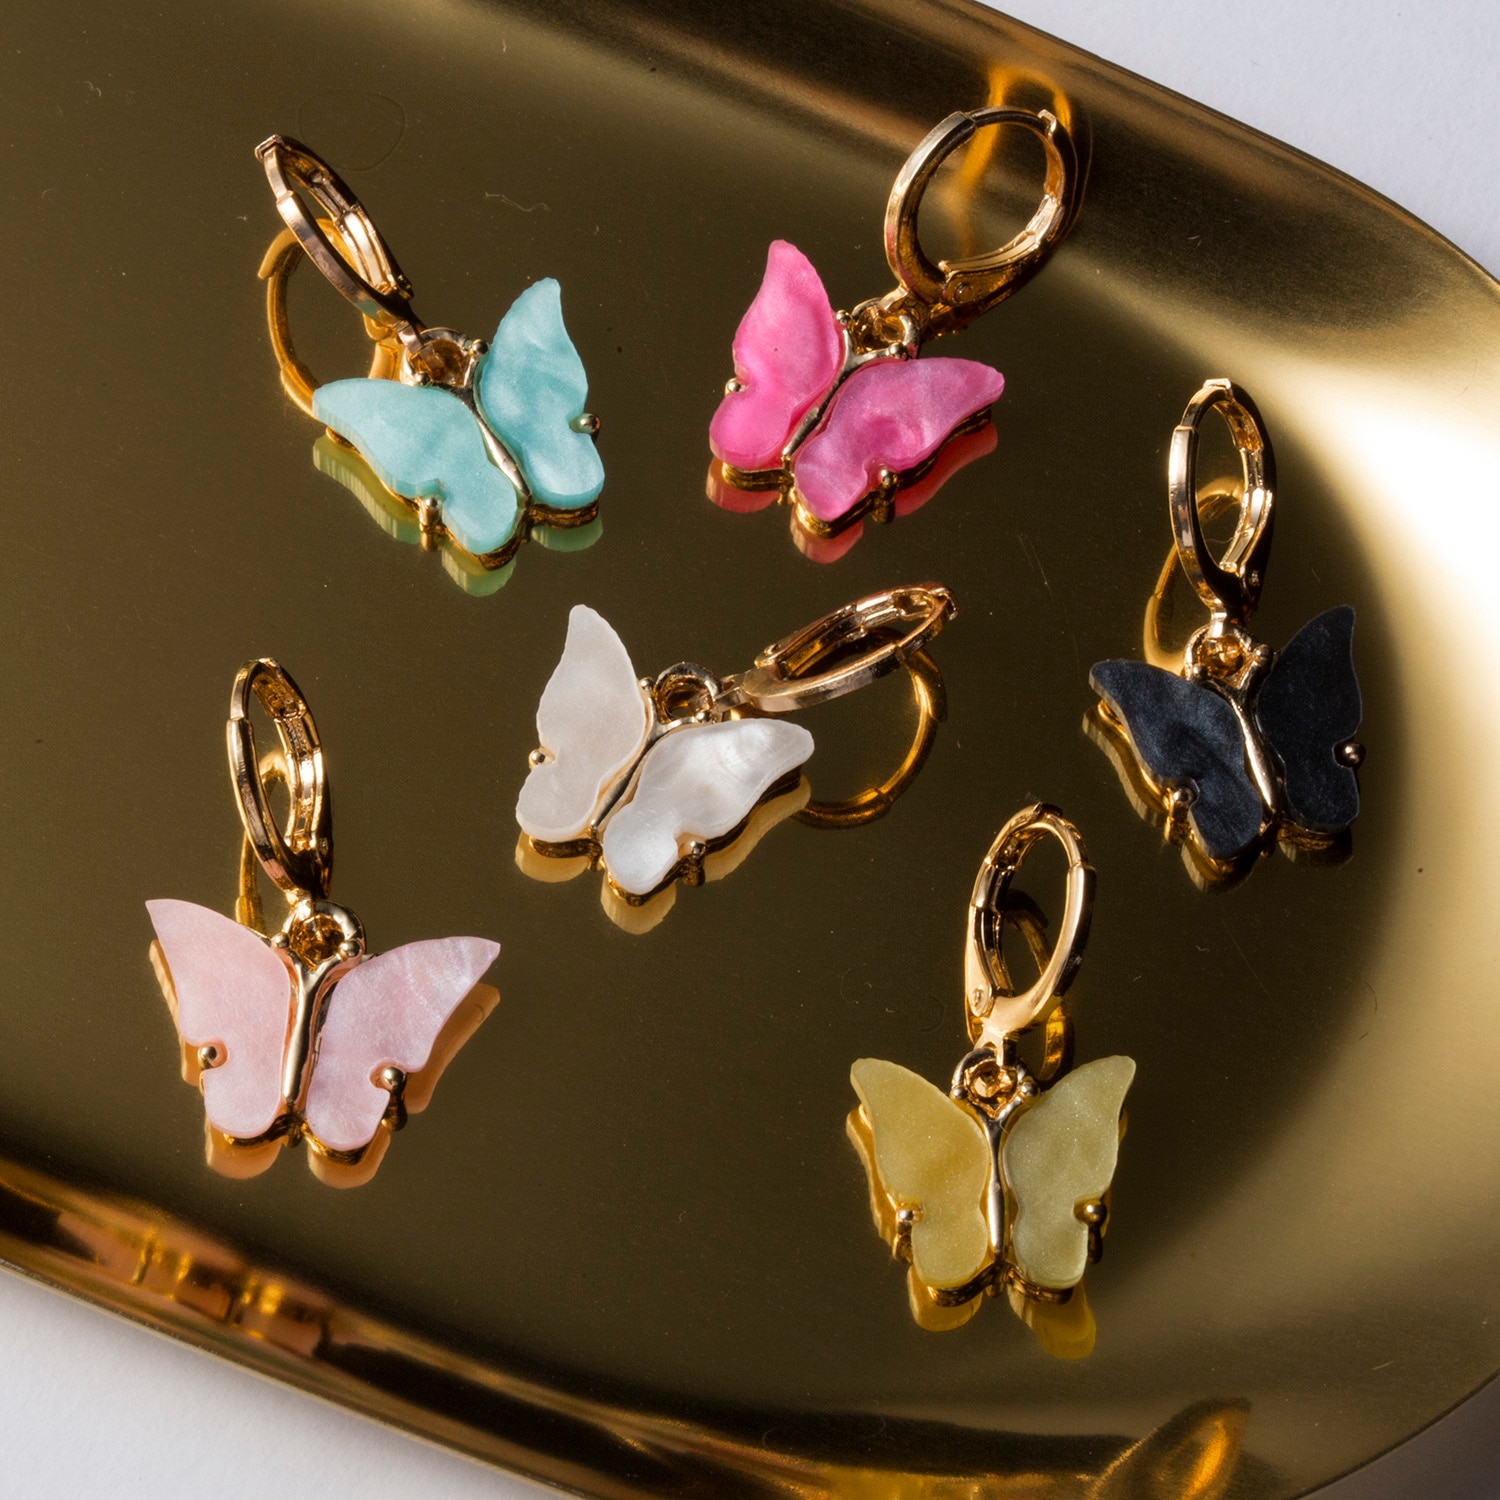 shop with crypto buy New Fashion Design Butterfly Jewelry Colorful Acrylic Butterfly Stud Earrings for Women 2020 Bohemia Small Cute Earring Jewelry pay with bitcoin